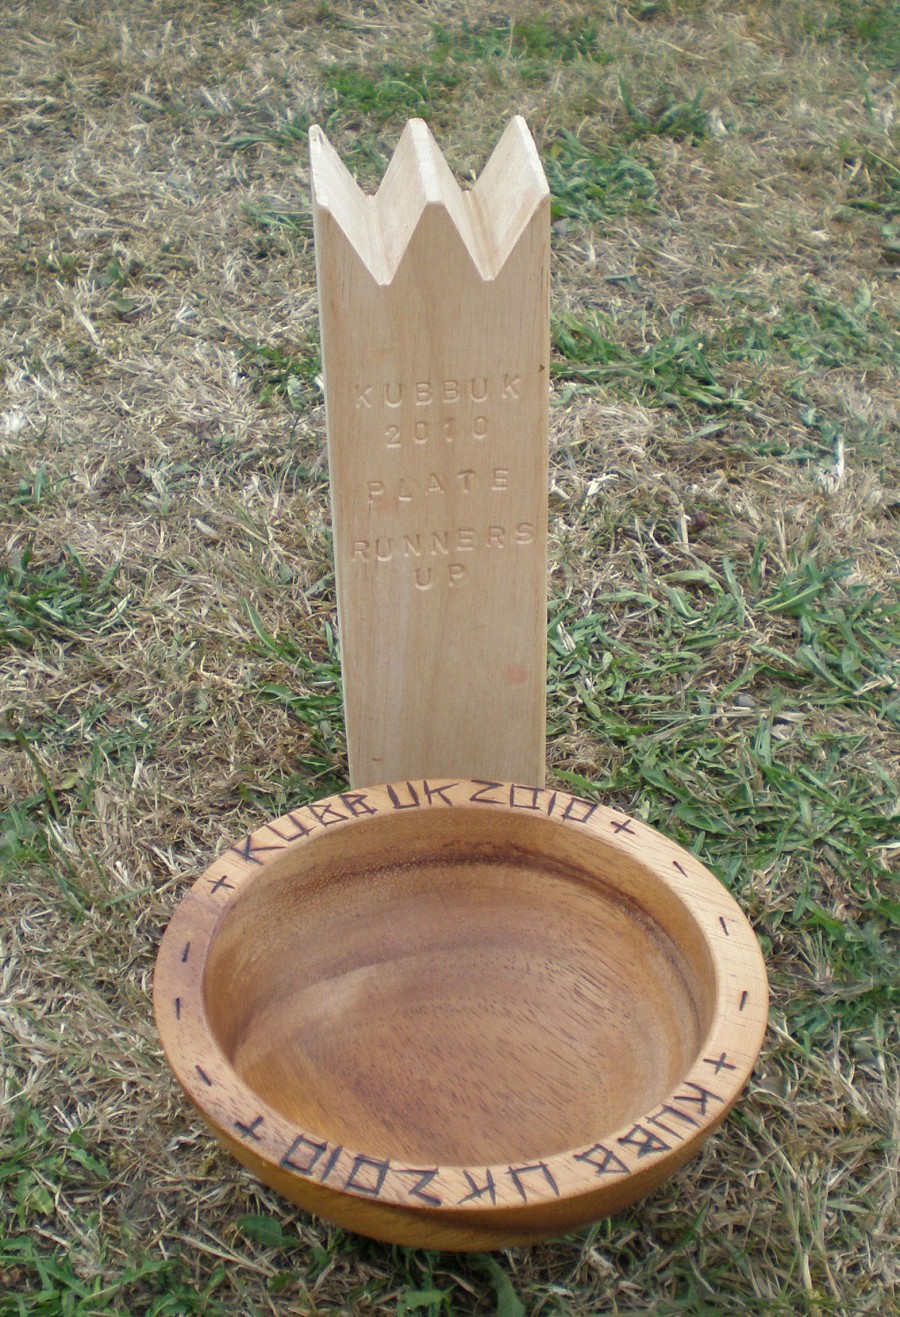  The desirable plate and runners up trophy. 